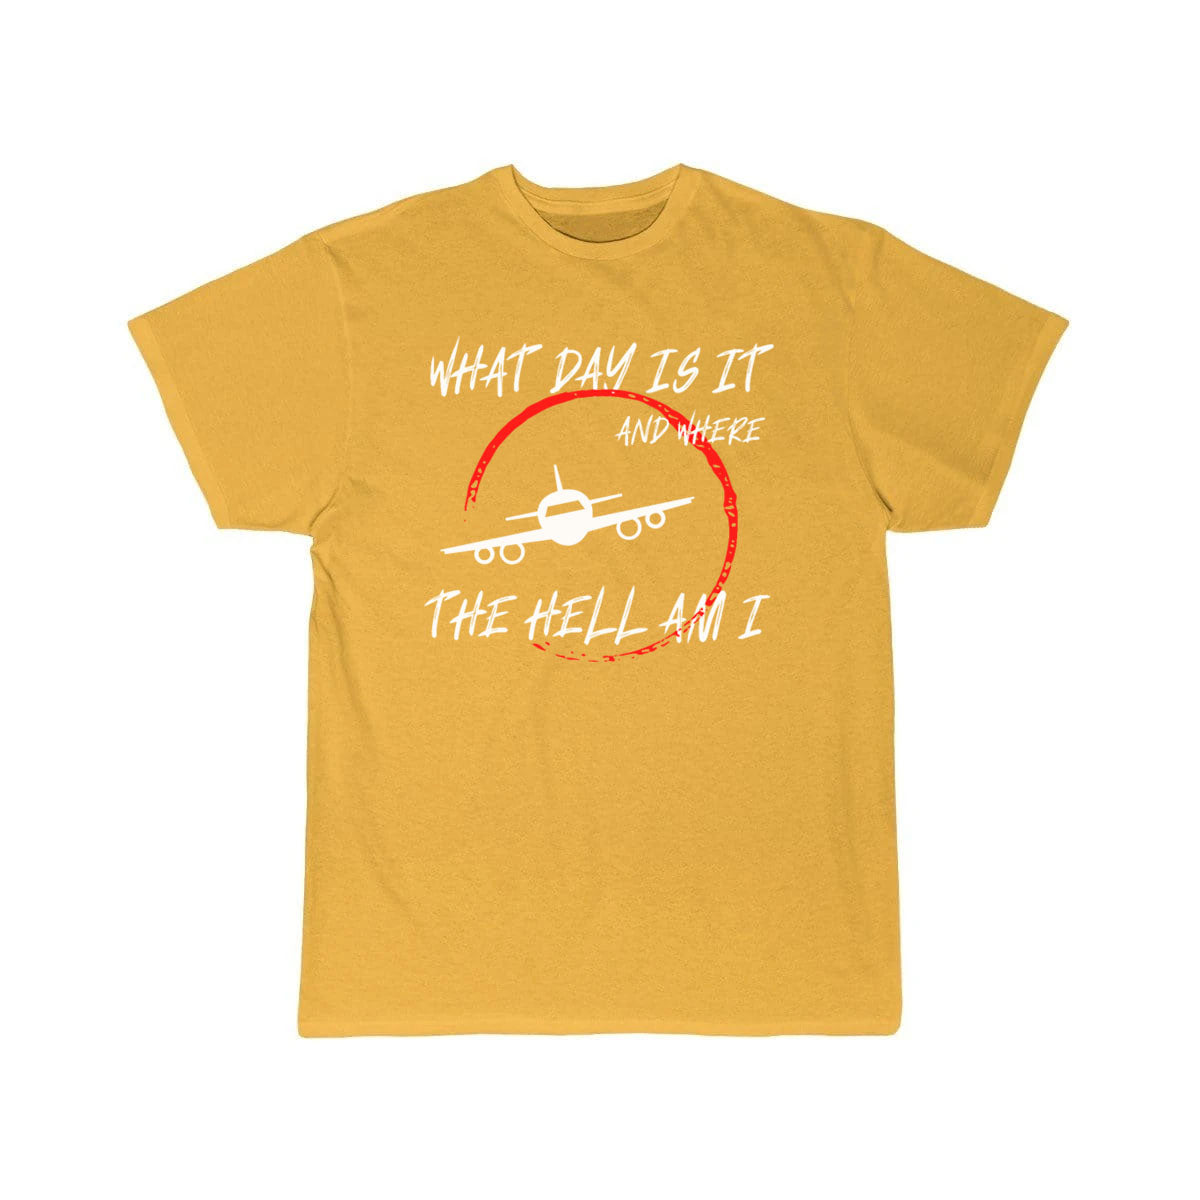 What day is it and where the hell am i T-SHIRT THE AV8R